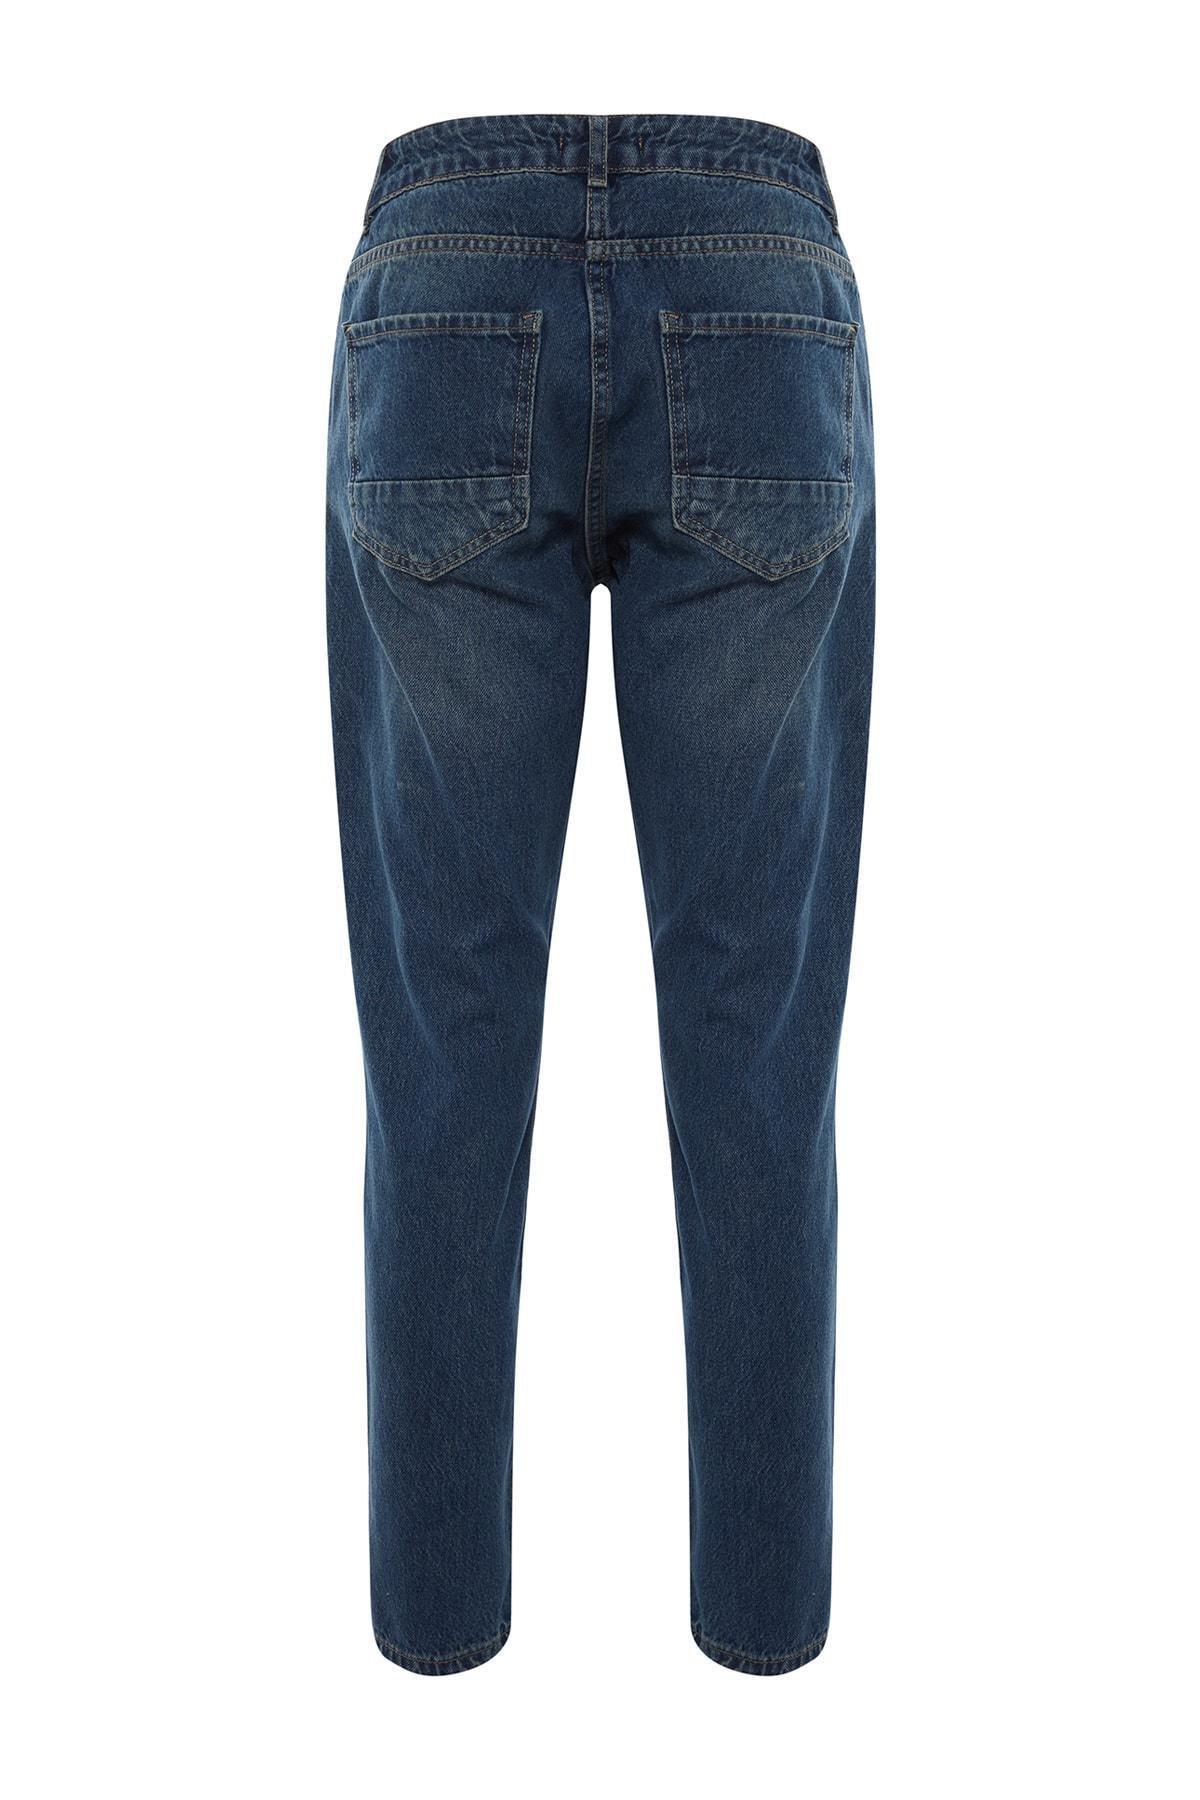 Trendyol - Navy Relaxed Mid Waist Jeans